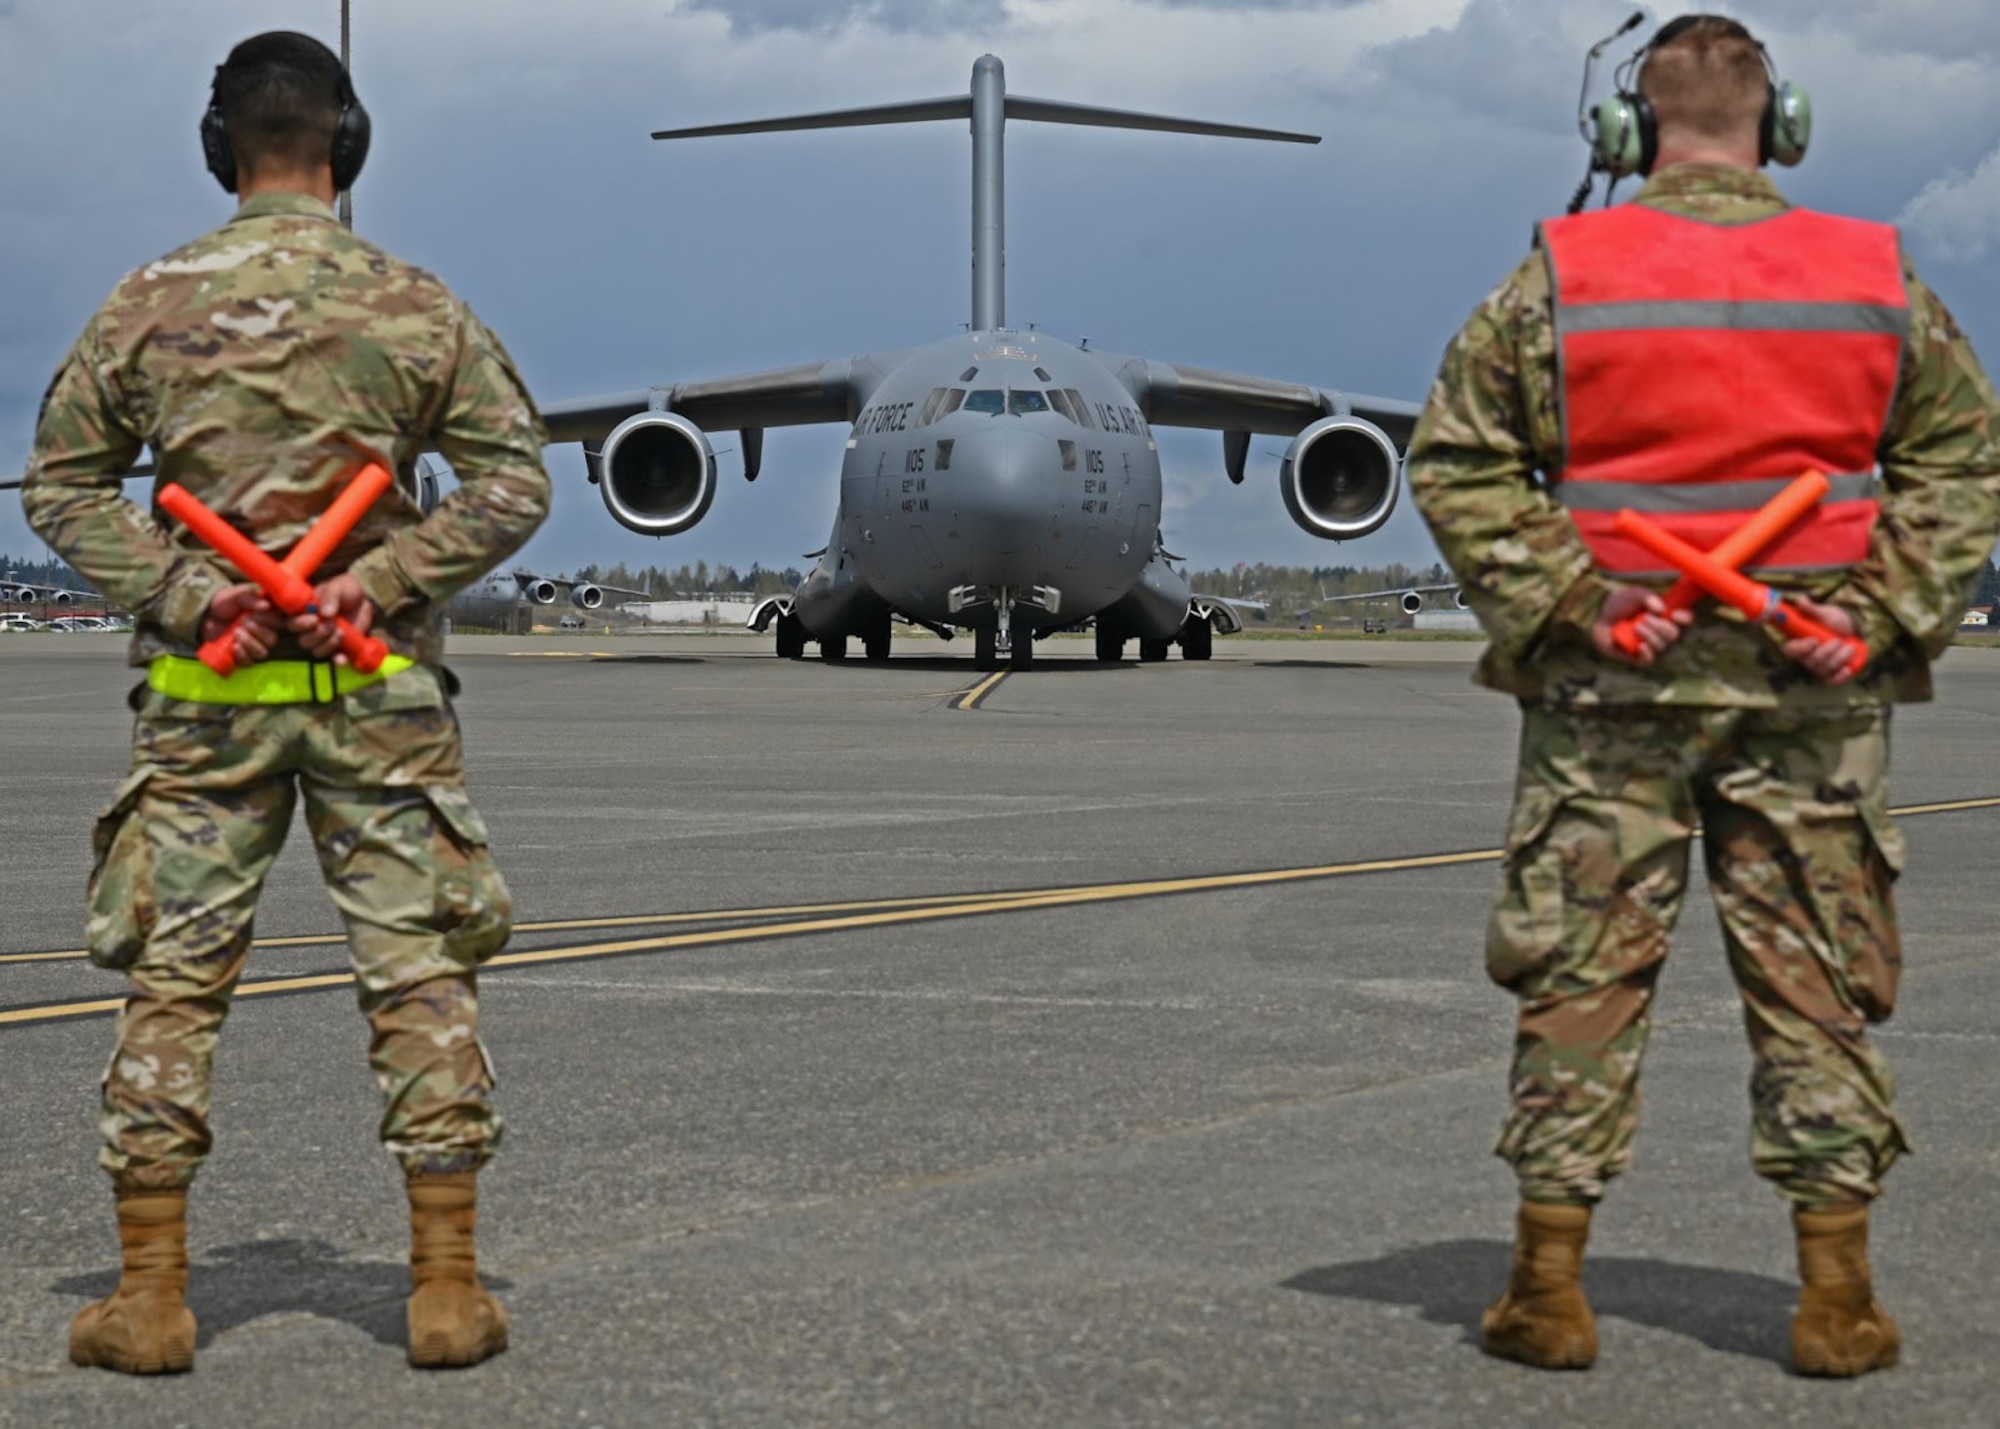 U.S. Air Force Airman 1st Class Michael Eresh-Archuleta, left, material management journeyman with the 627th Logistics Readiness Squadron, and Staff Sgt. Oden Bagley, aircraft hydraulics specialist with the 62nd Maintenance Squadron, marshall out a C-17 Globemaster III during Agile Combat Employment Training at Joint Base Lewis-McChord, Washington, April 21, 2022. The week-long ACE training focuses on taking the six primary maintenance Air Force Specialty Codes and combining them into two categories, mechanics and technicians. (U.S. Air Force photo by Airman 1st Class Callie Norton)